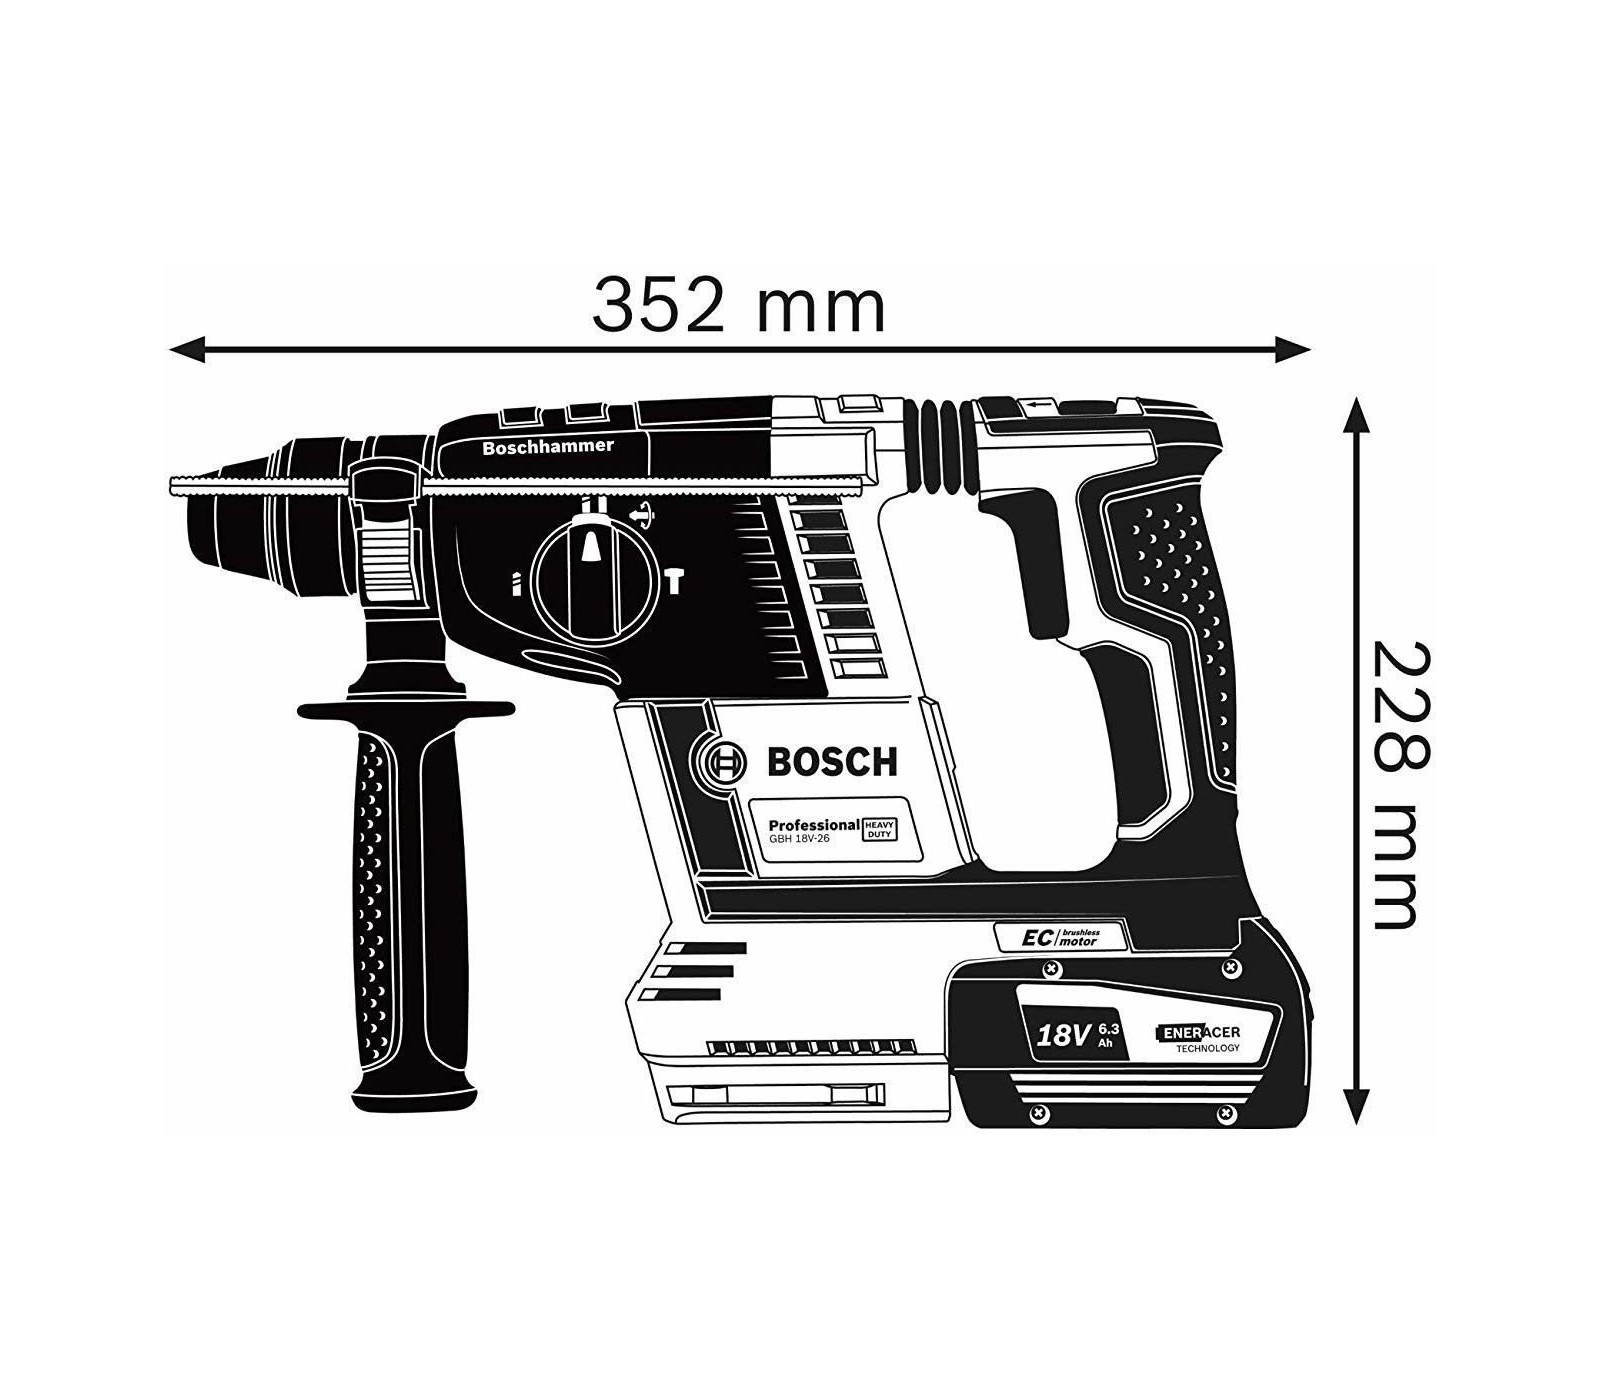 GBH 18V-EC Cordless Rotary Hammer with SDS plus